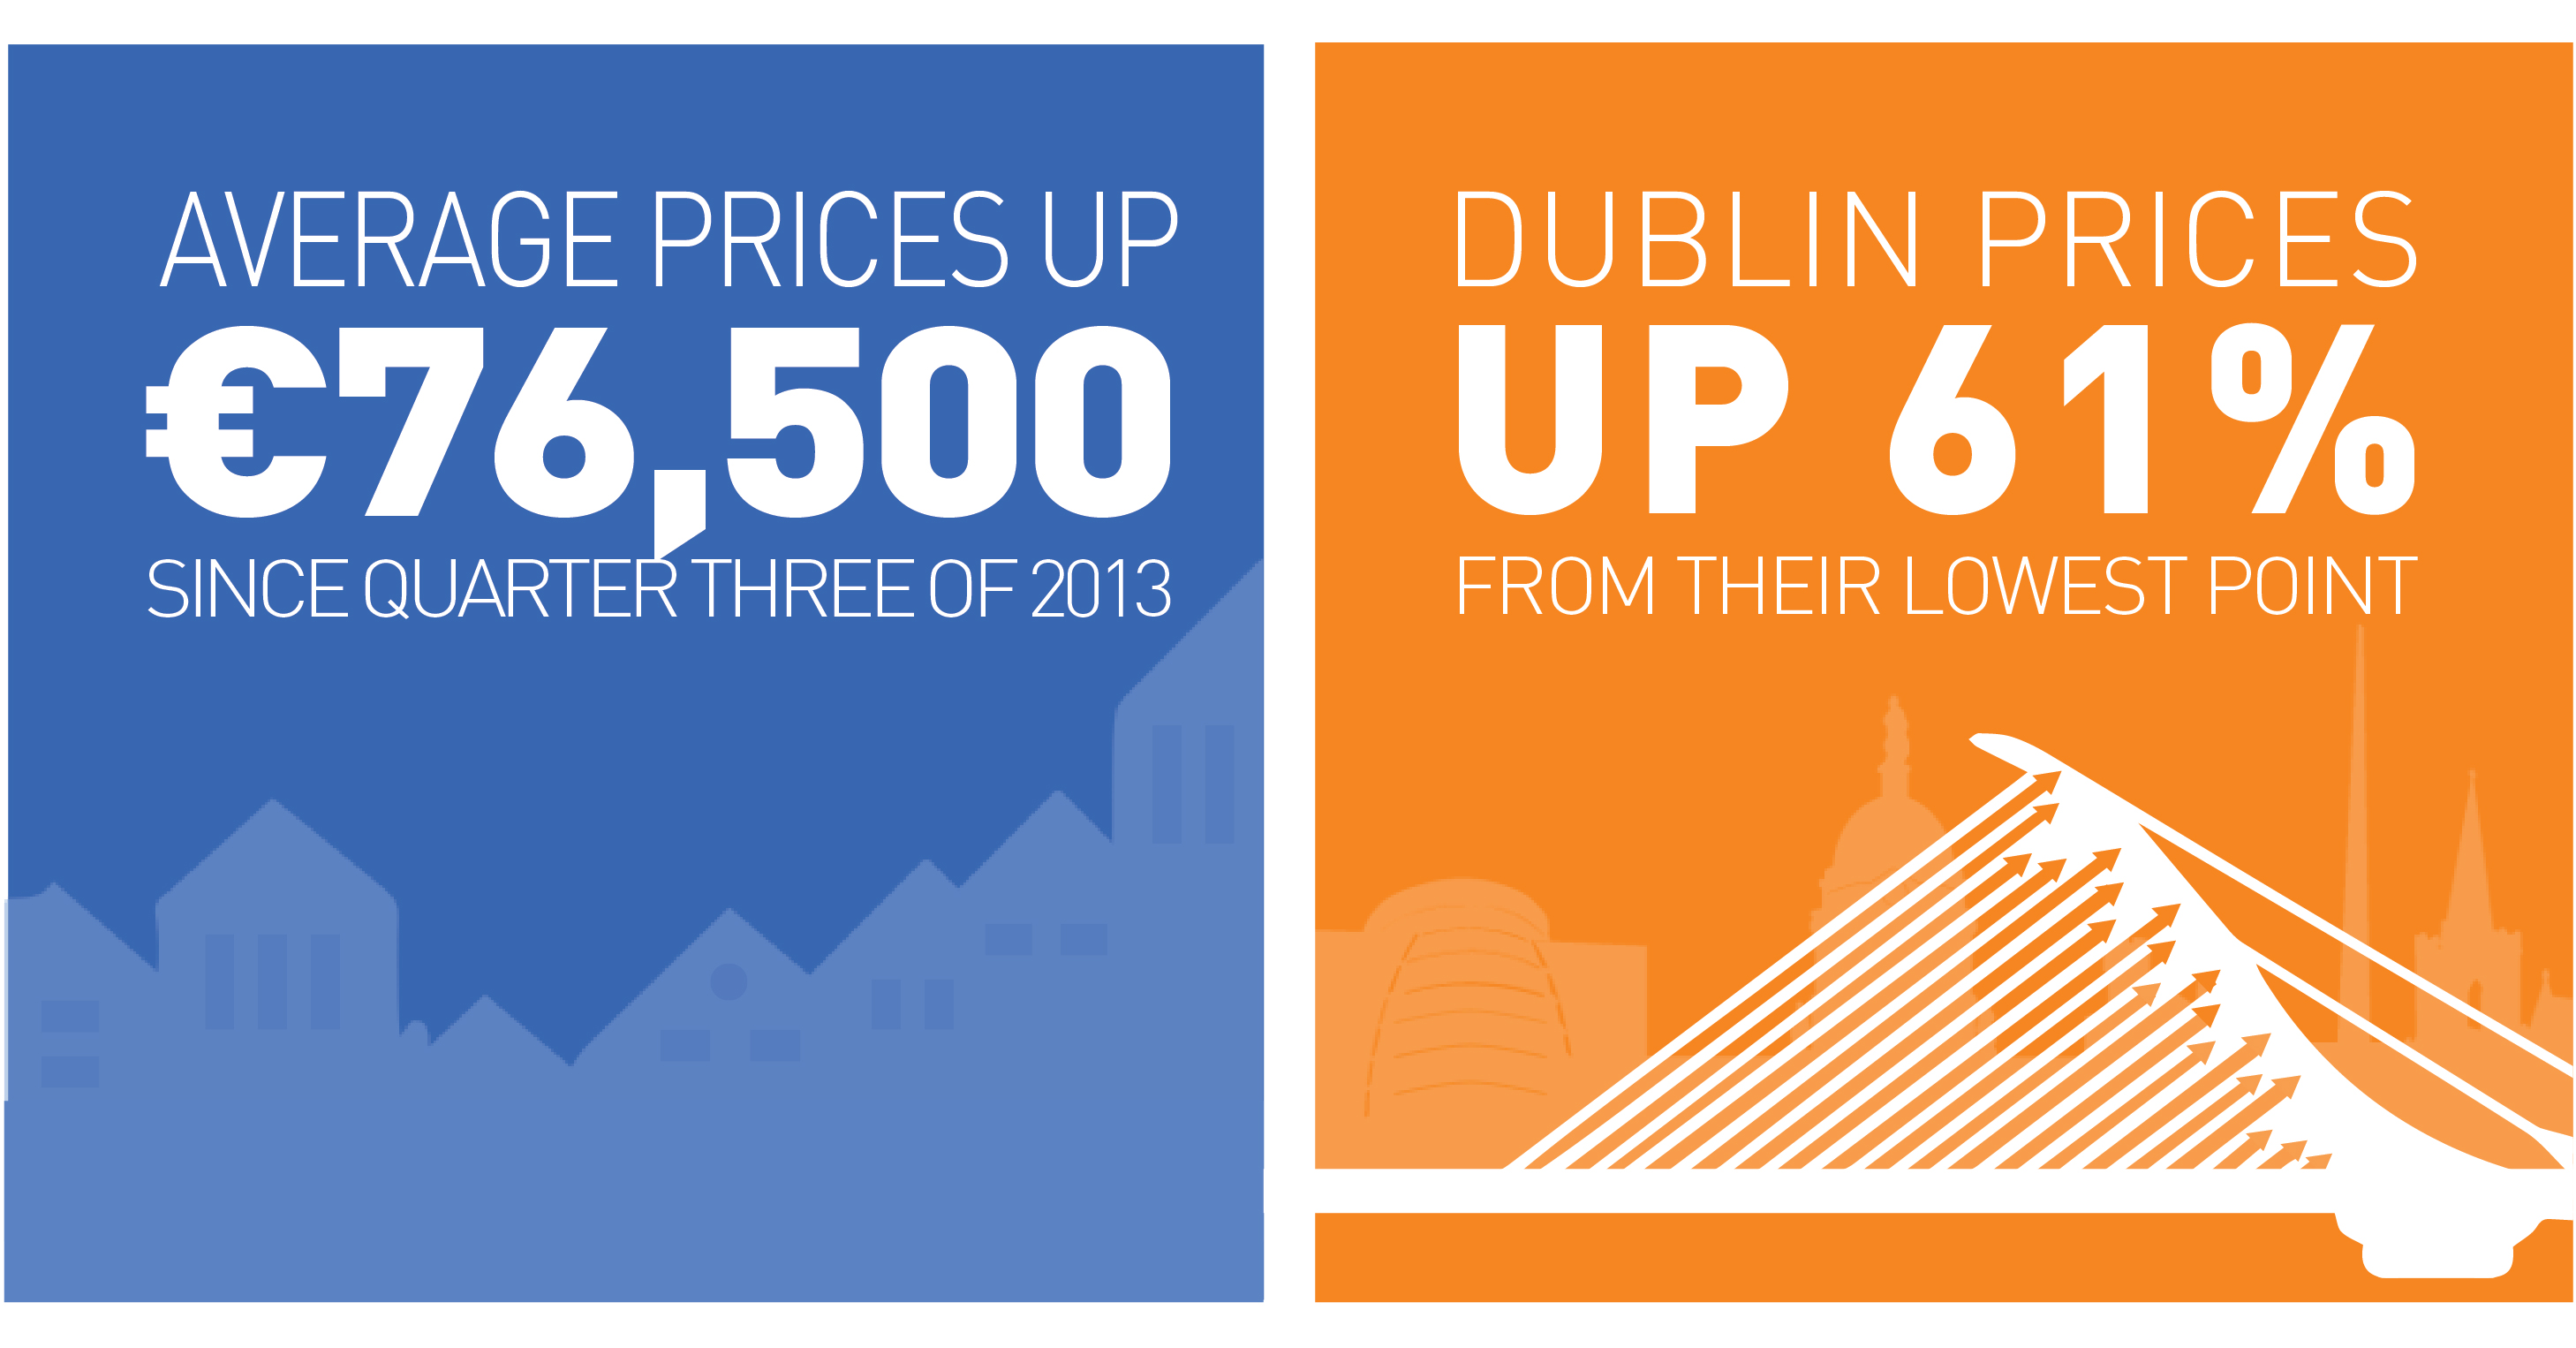 Average prices up €76,500 since quarter three of 2013